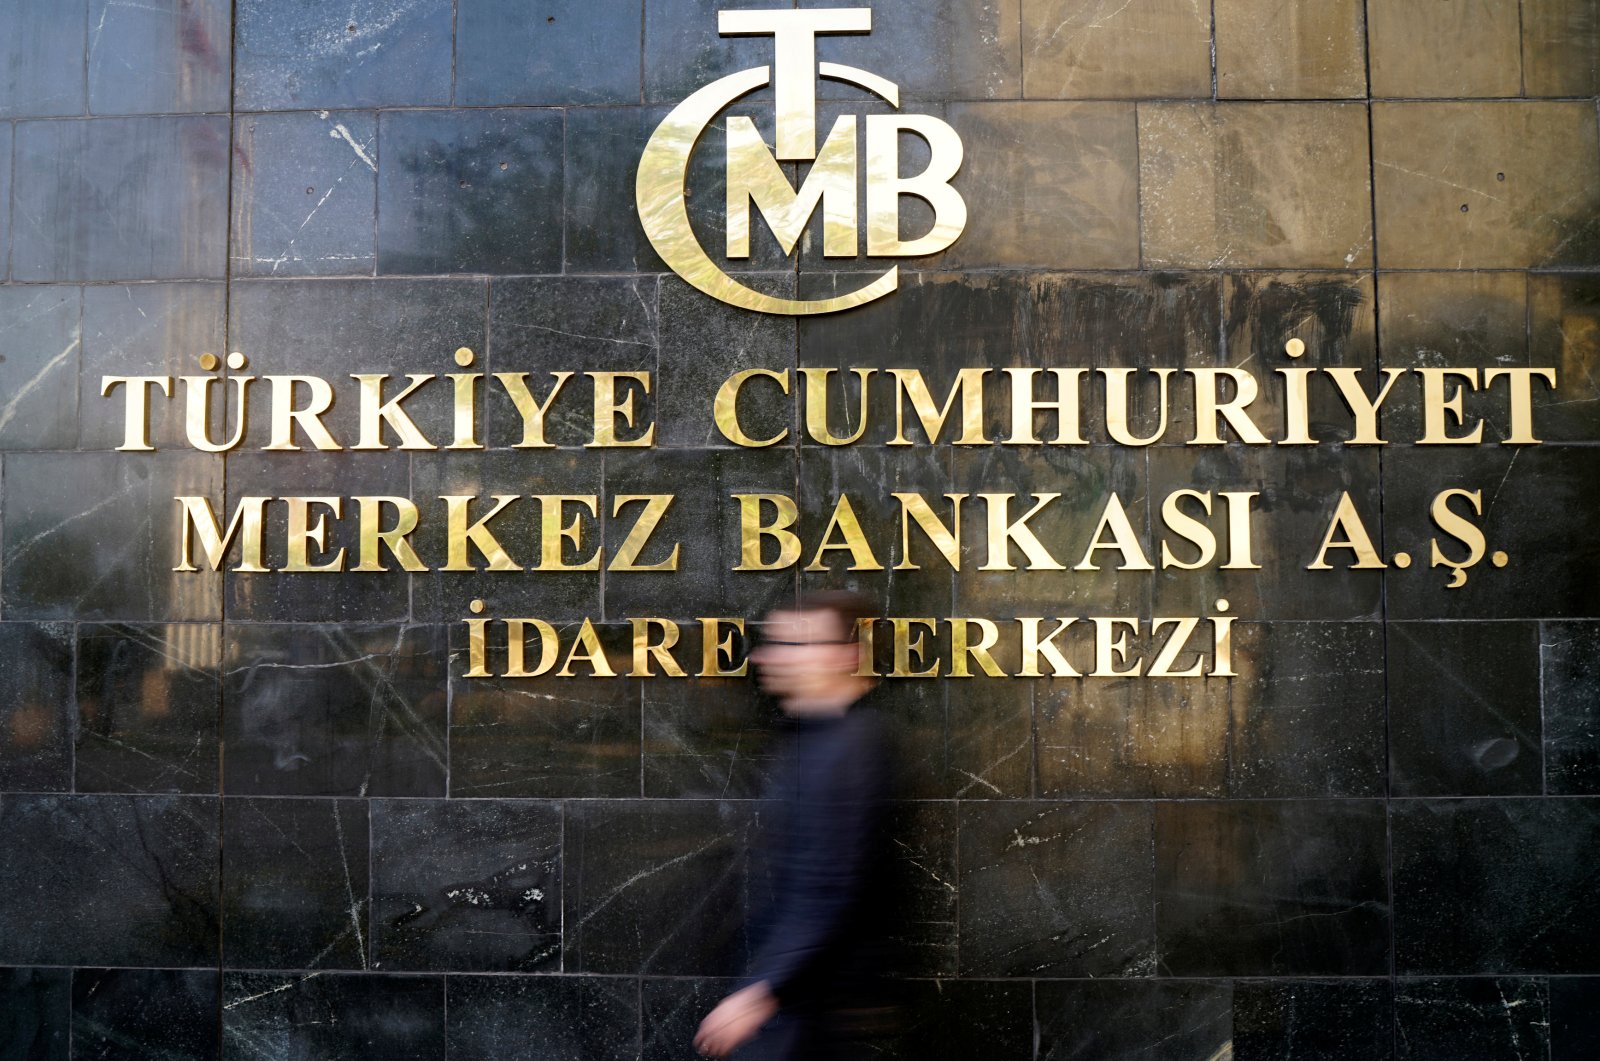 A man leaves the Central Bank of the Republic of Turkey headquarters in Ankara, Turkey, April 19, 2015. (Reuters Photo)